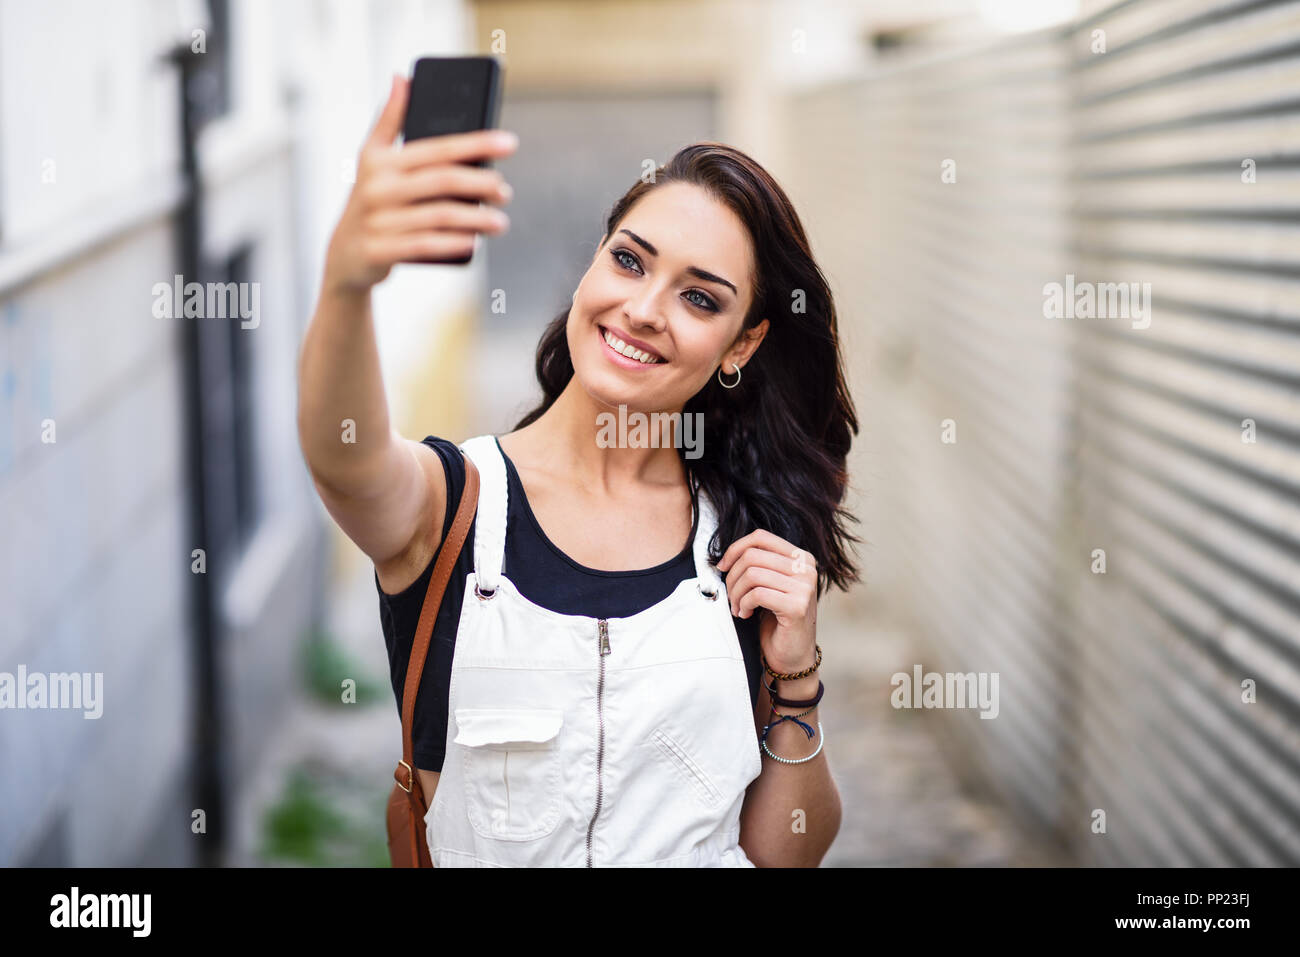 Young woman taking selfie photograph with her smart phone outdoors. Girl wearing denim dress in urban background. Technology concept. Stock Photo